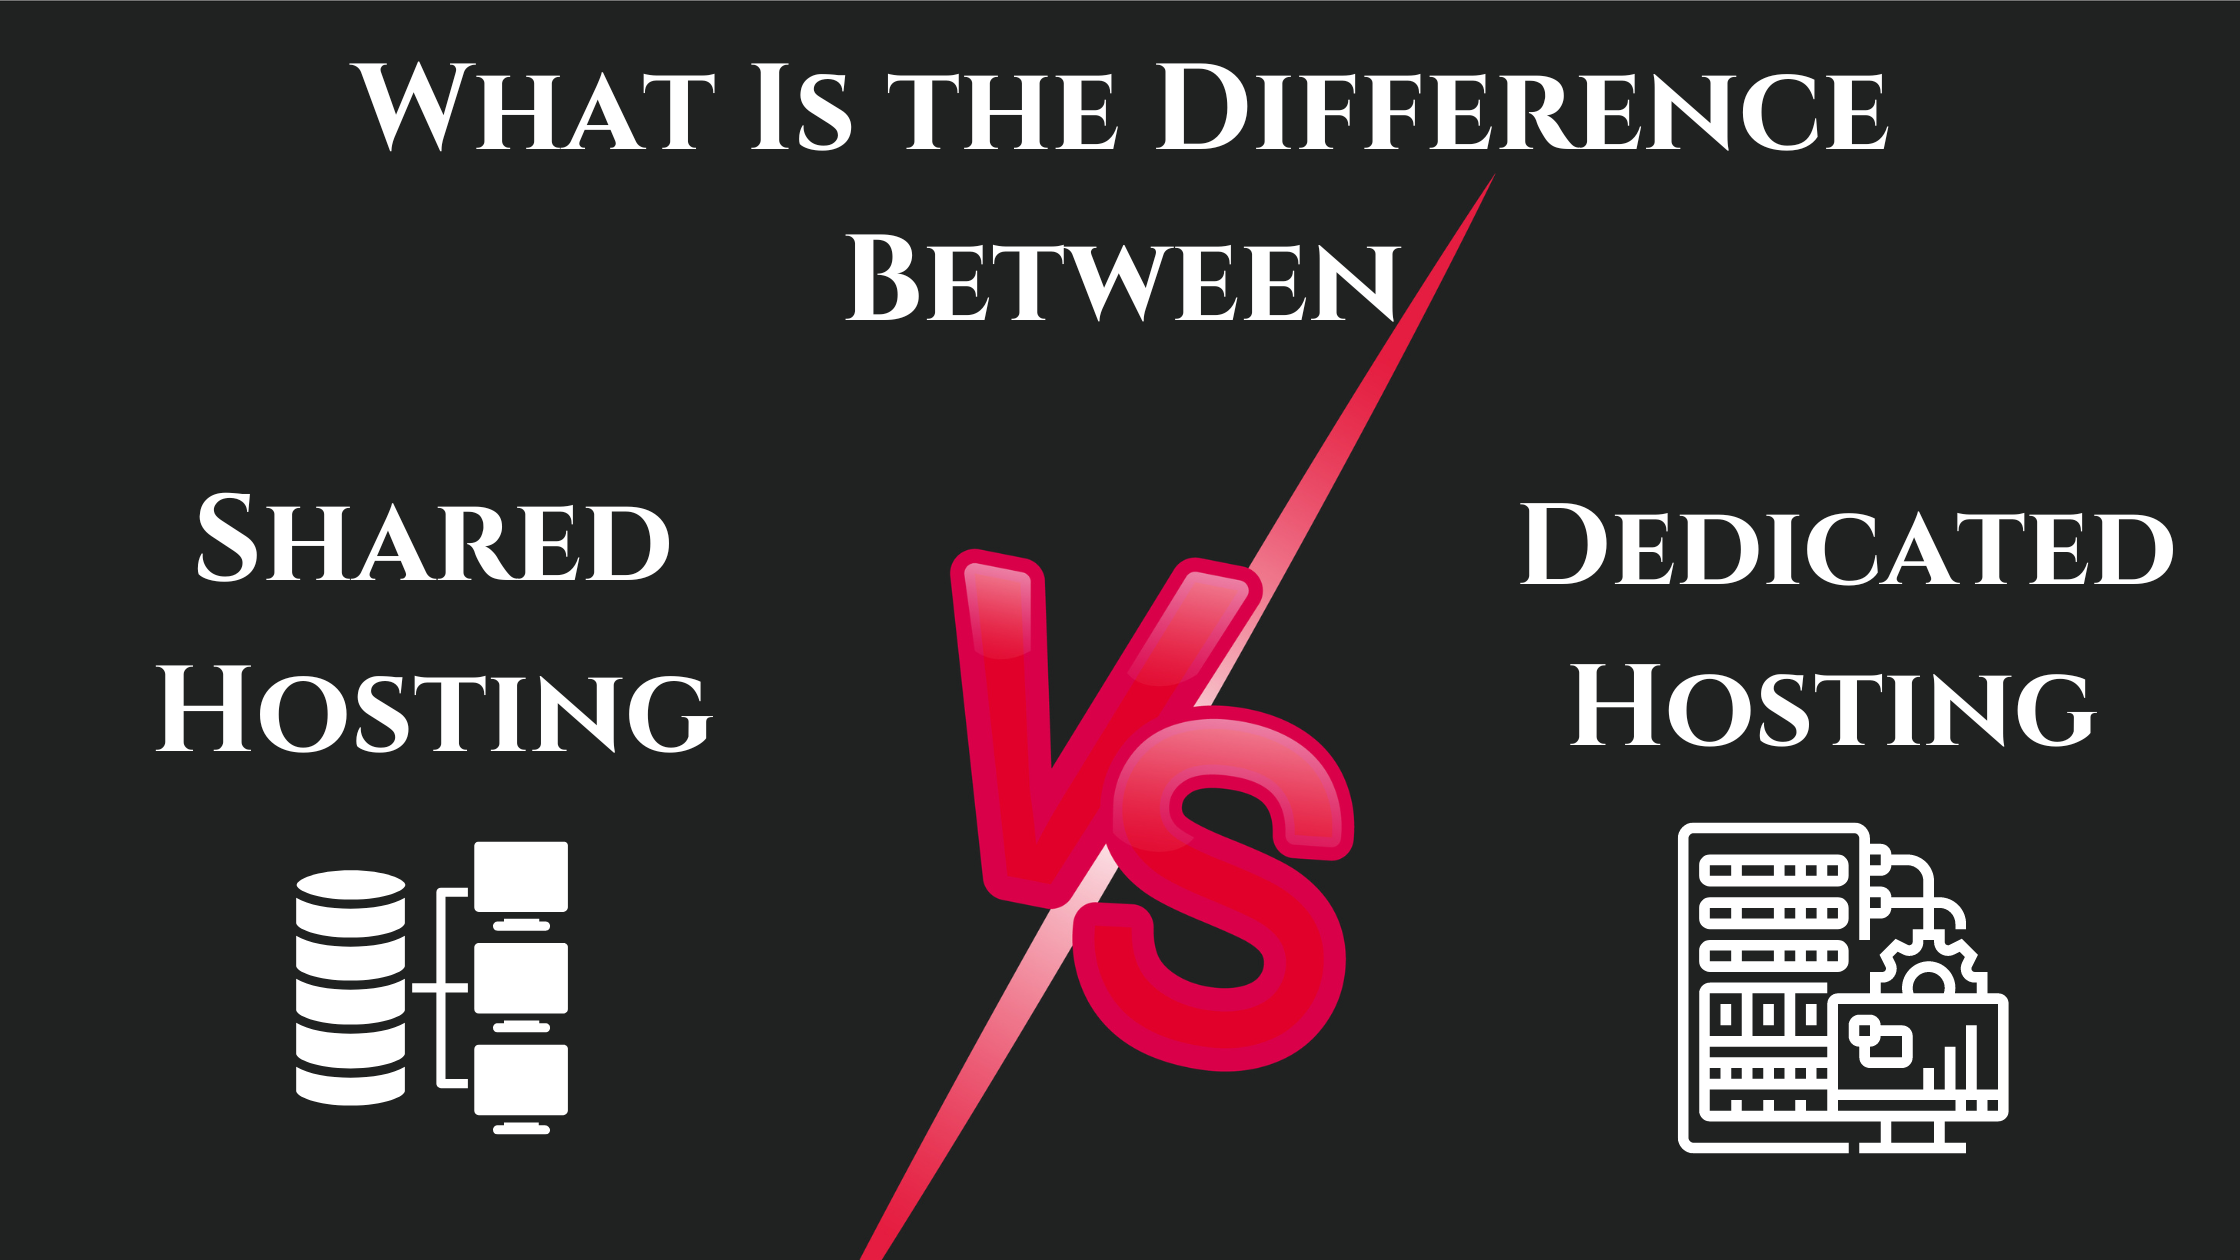 What Is the Difference Between Shared Hosting & Dedicated Hosting?